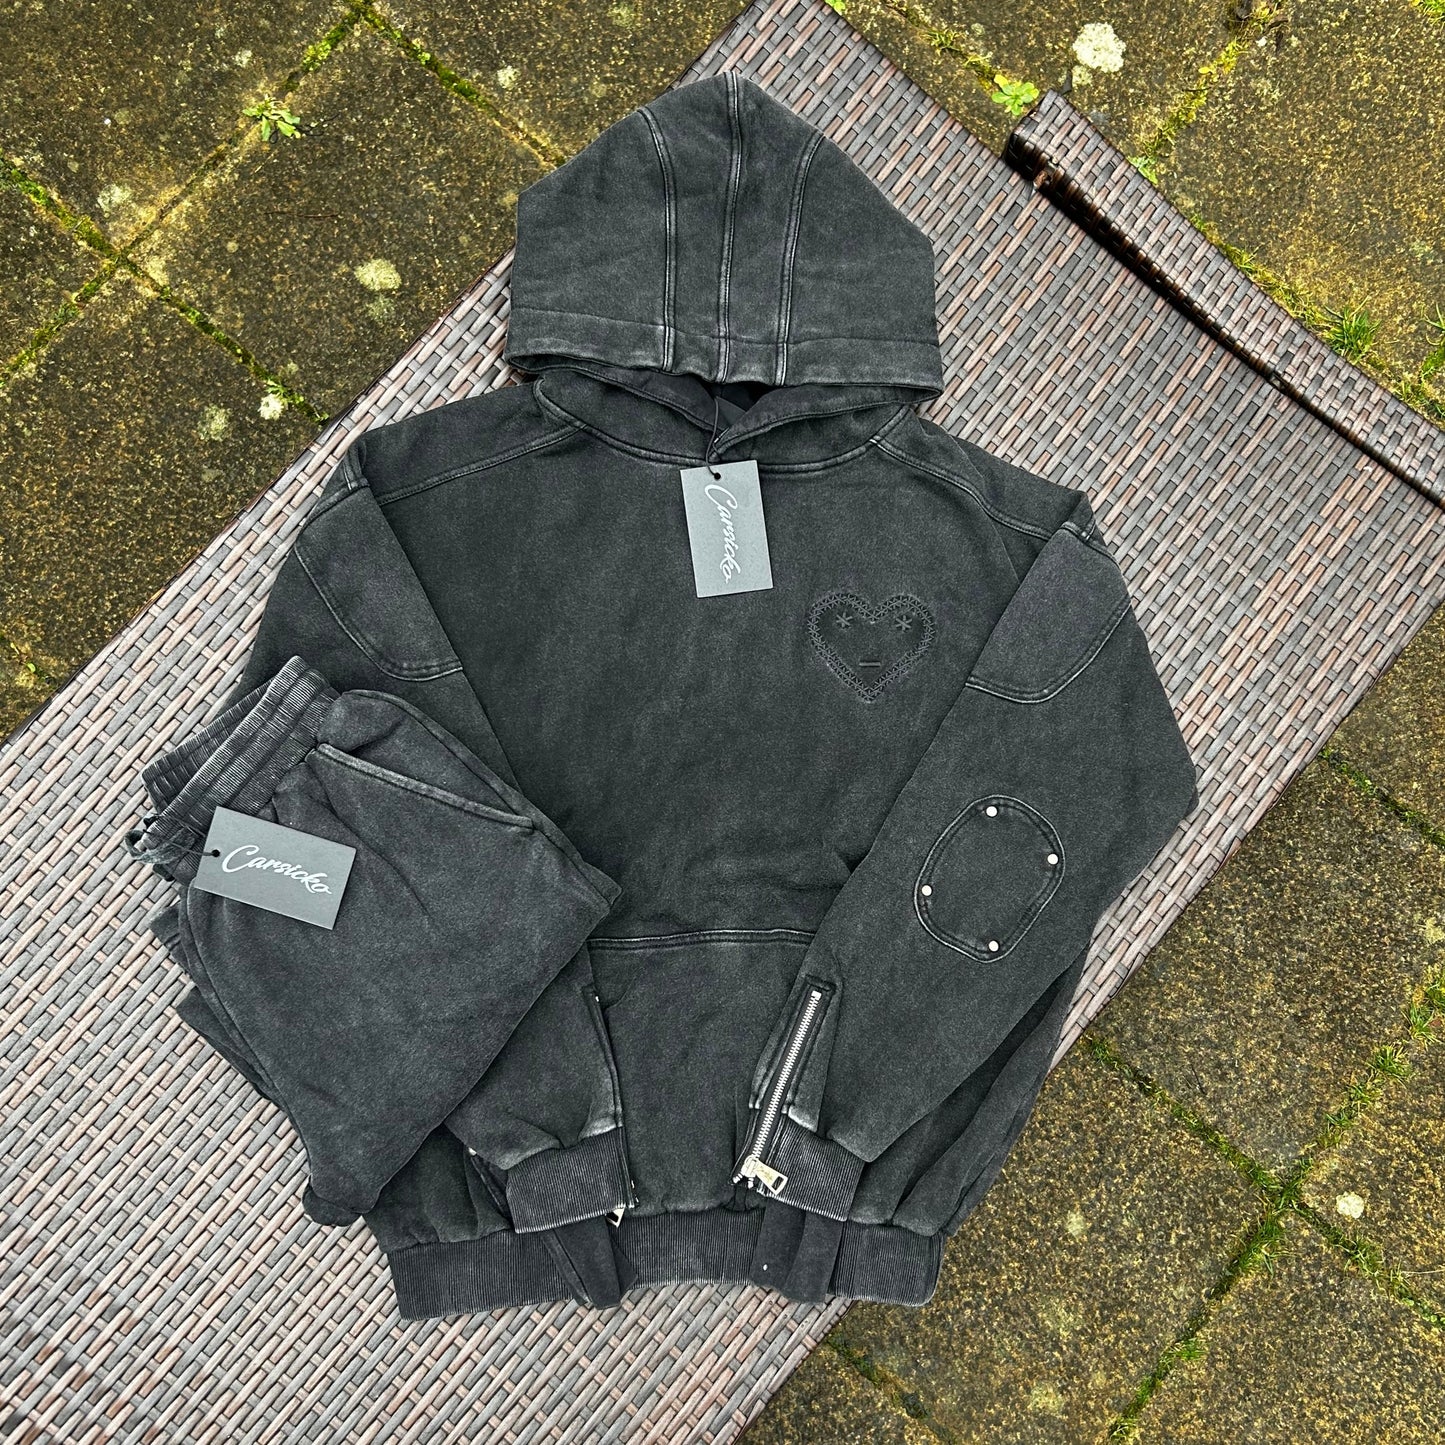 Carsicko Washed Grey "War" Tracksuit